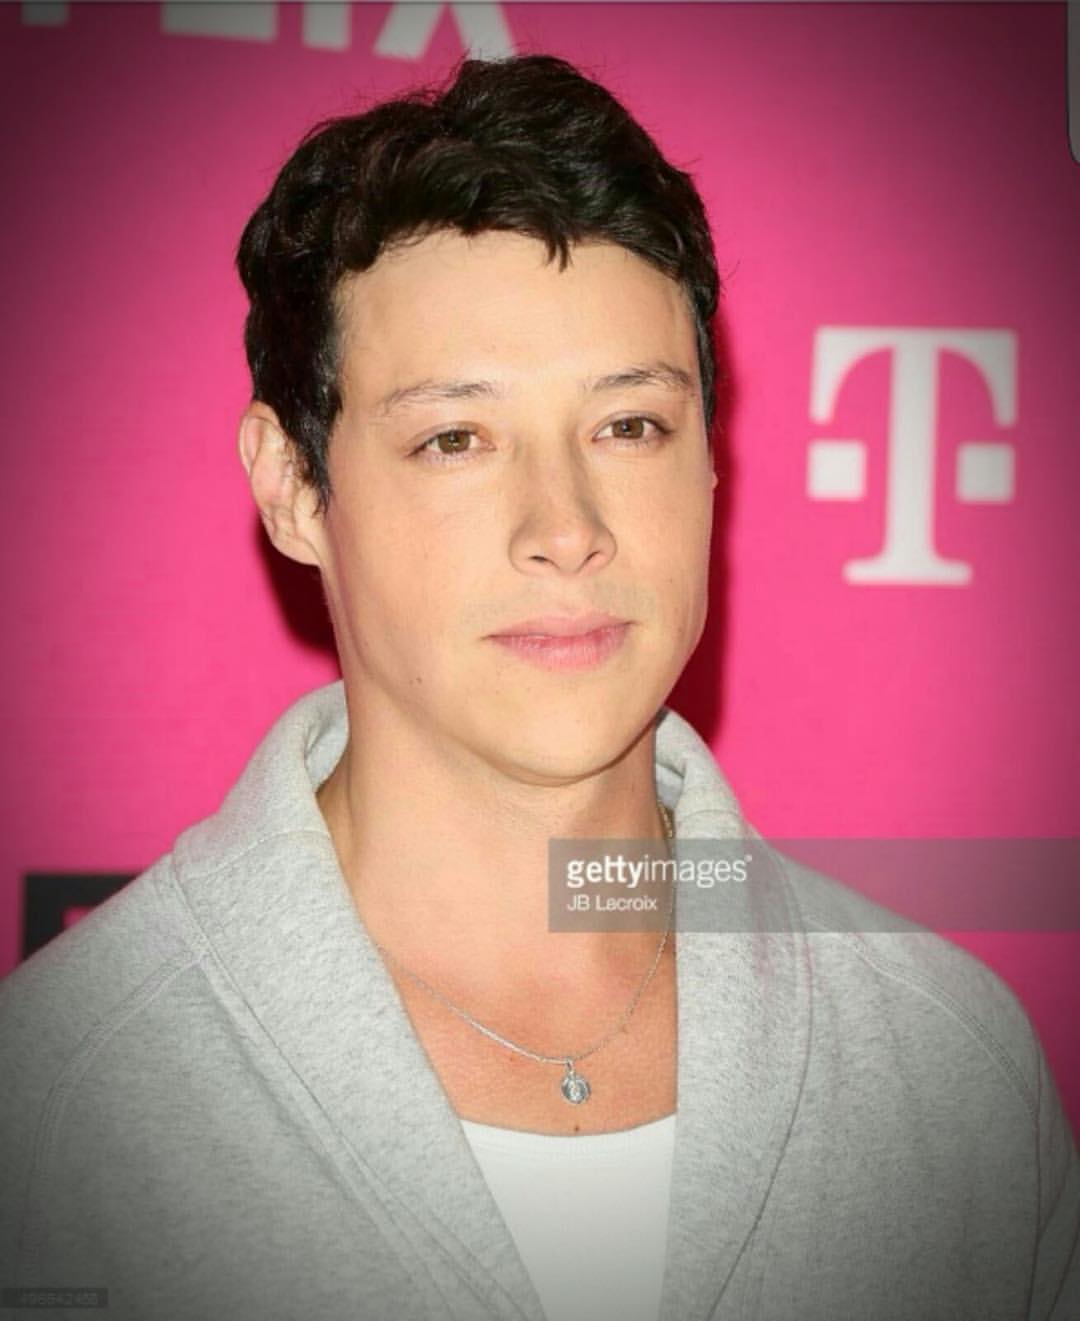 Reynaldo Pacheco attends the T-Mobile Un-carrier X launch party at the Shrine Auditorium on November 10, 2015 in Los Angeles, California.